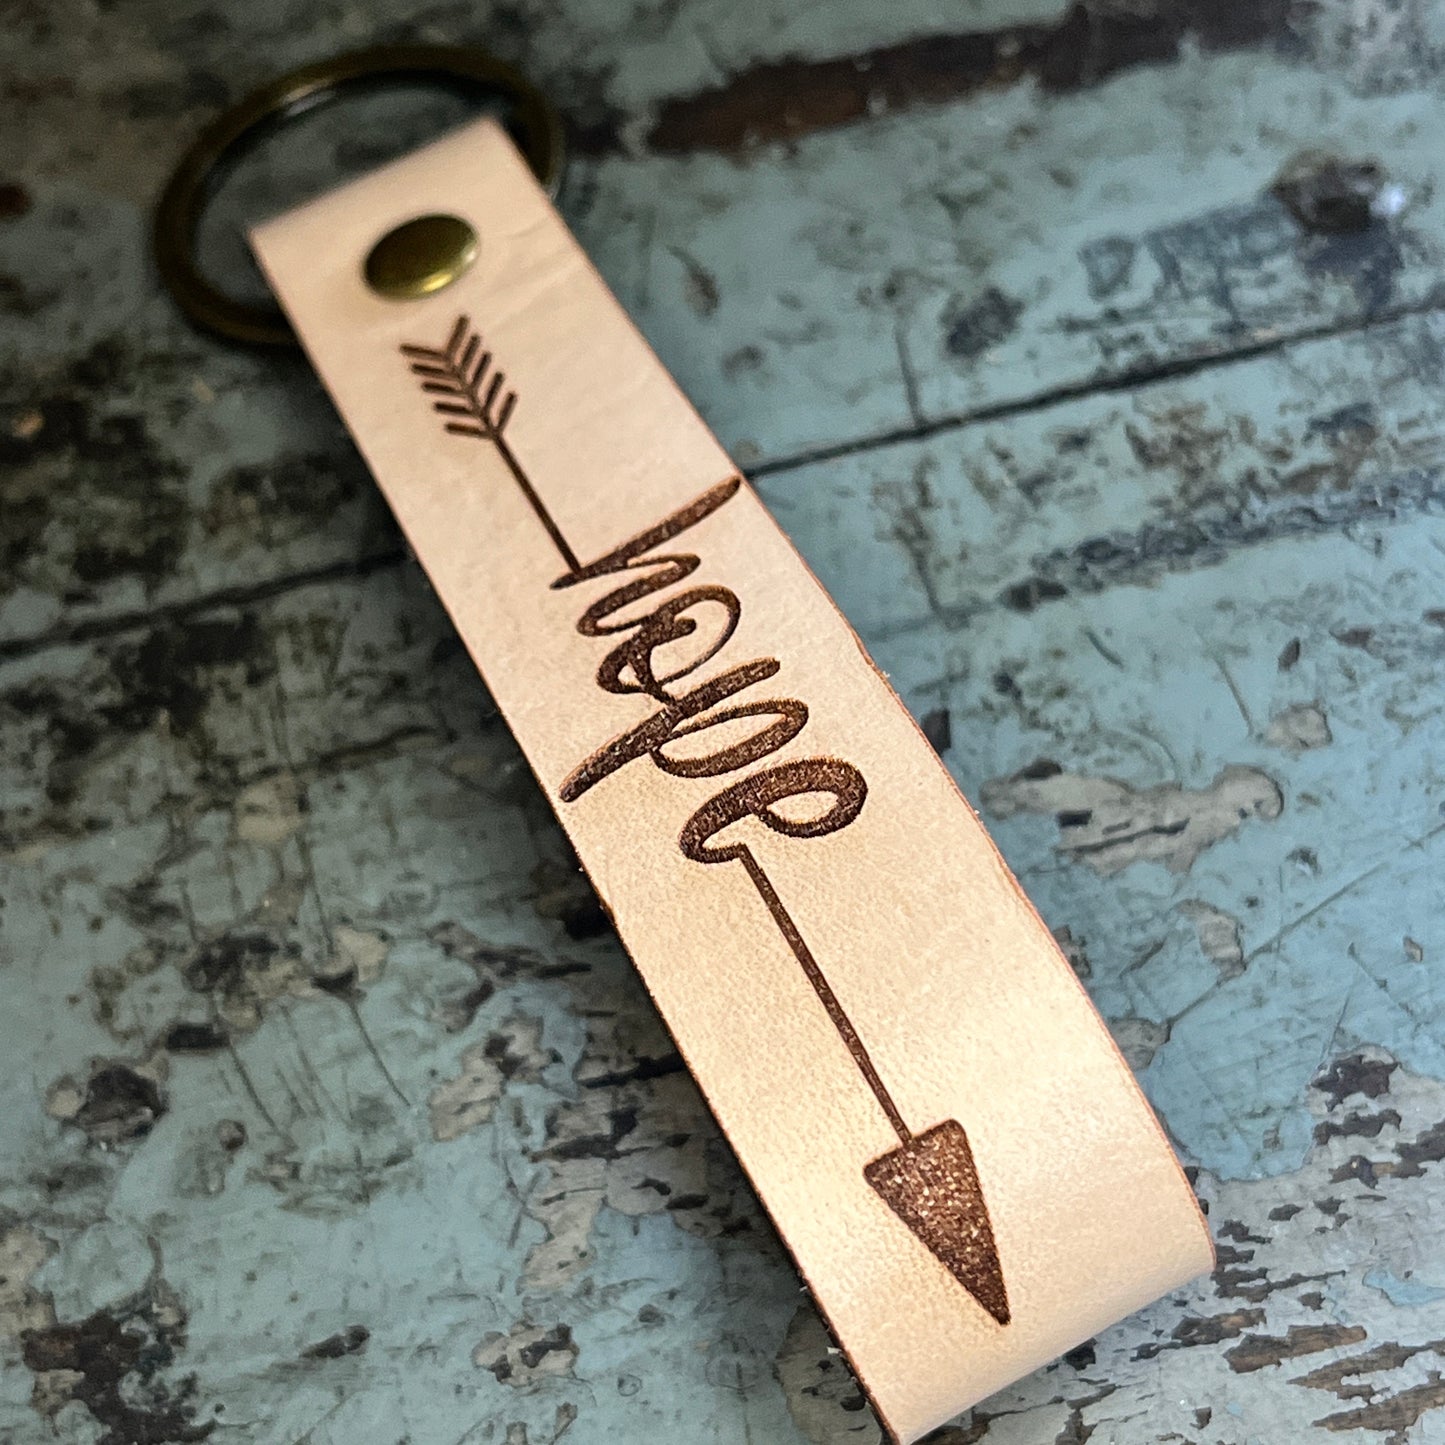 Hope Leather Keychain, Jeremiah 29 Bible Verse Encouragement Gift to Uplift and Empower